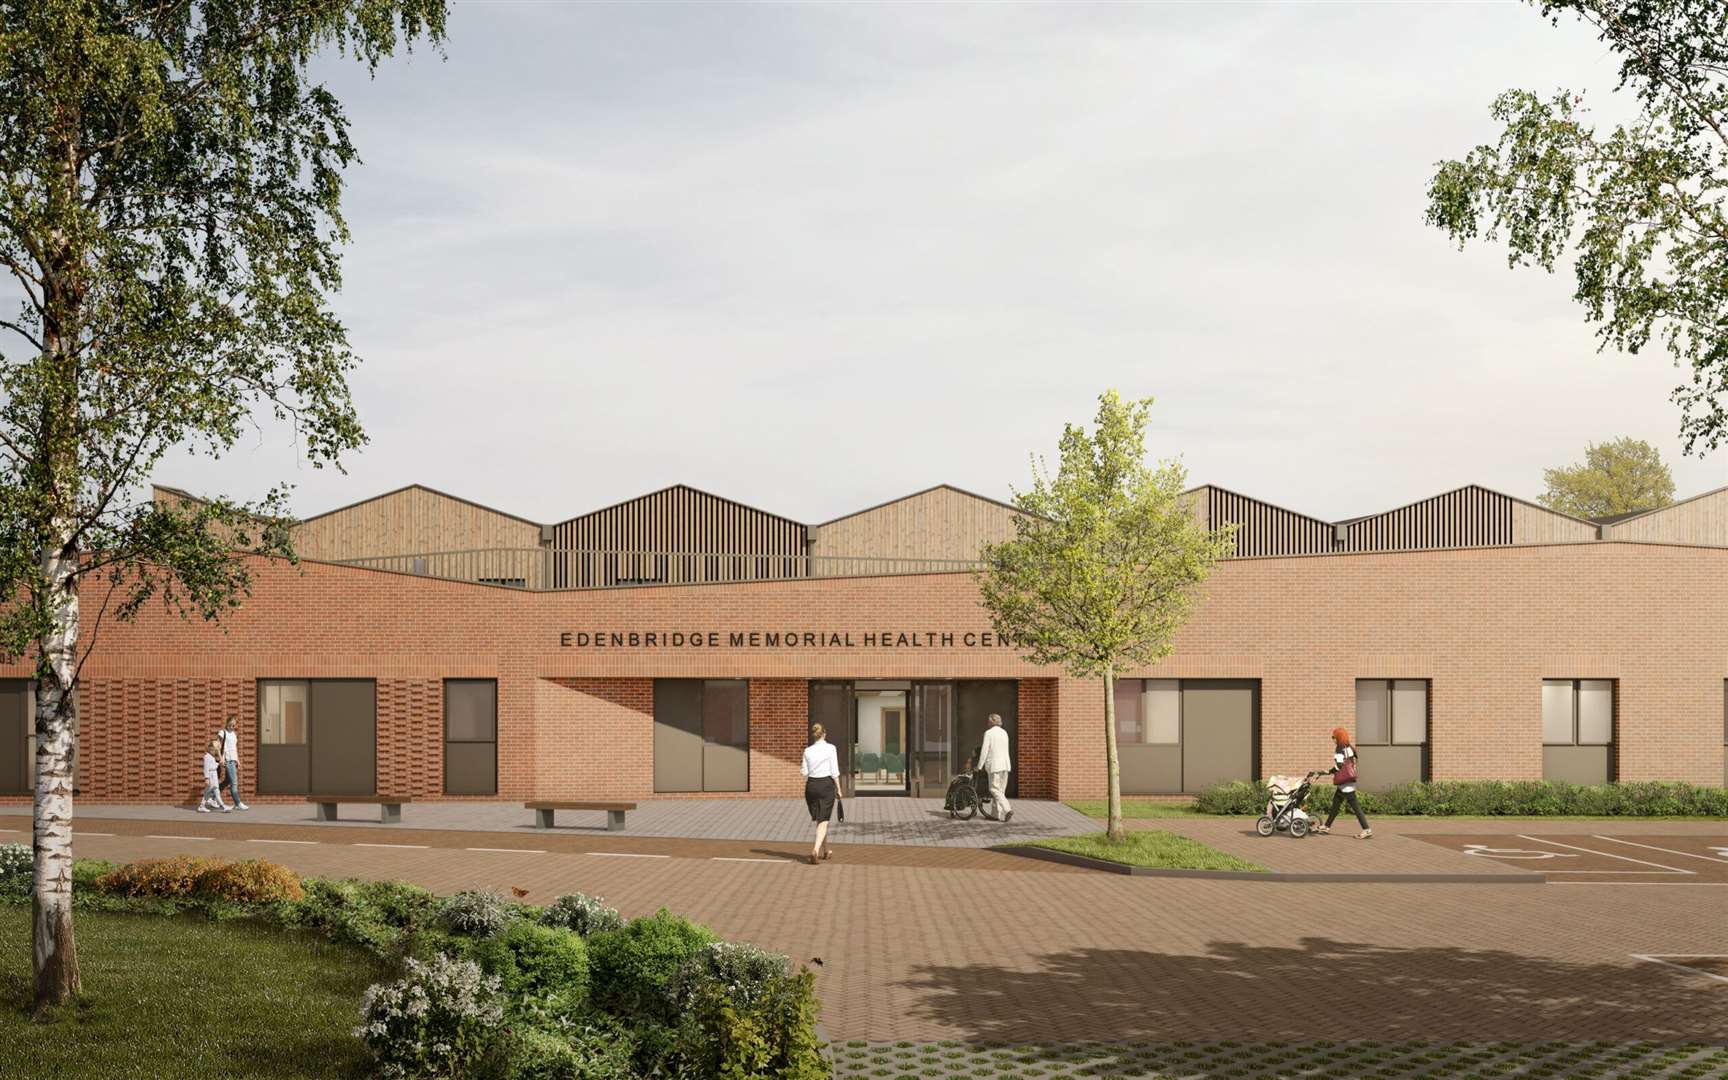 An impression of how the Edenbridge Memorial Health Centre will look